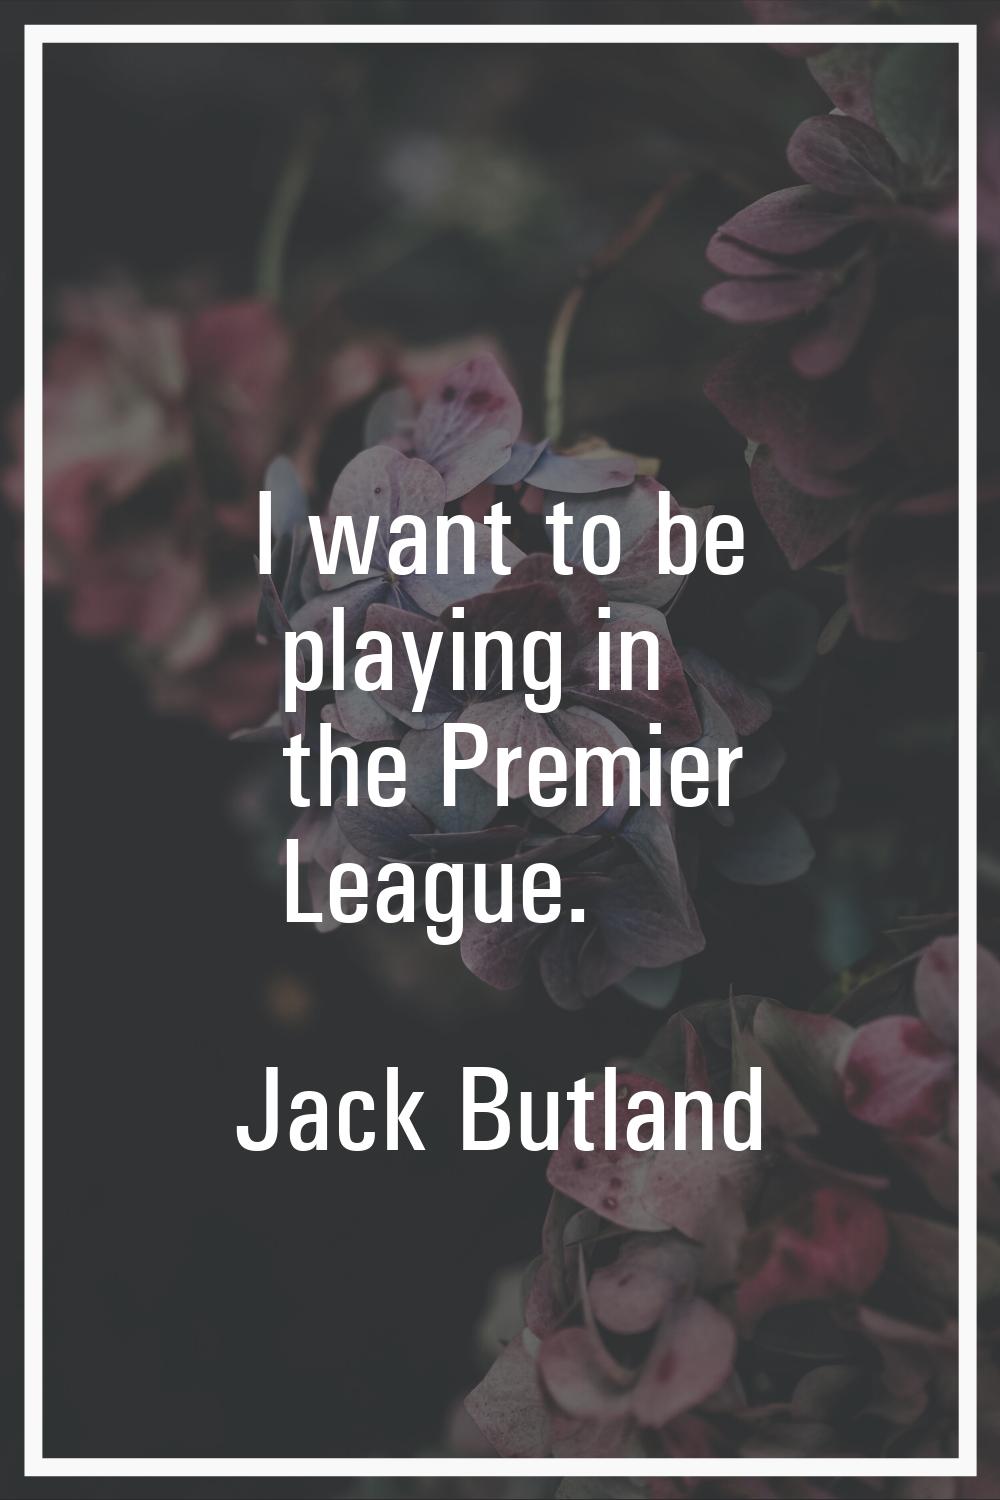 I want to be playing in the Premier League.